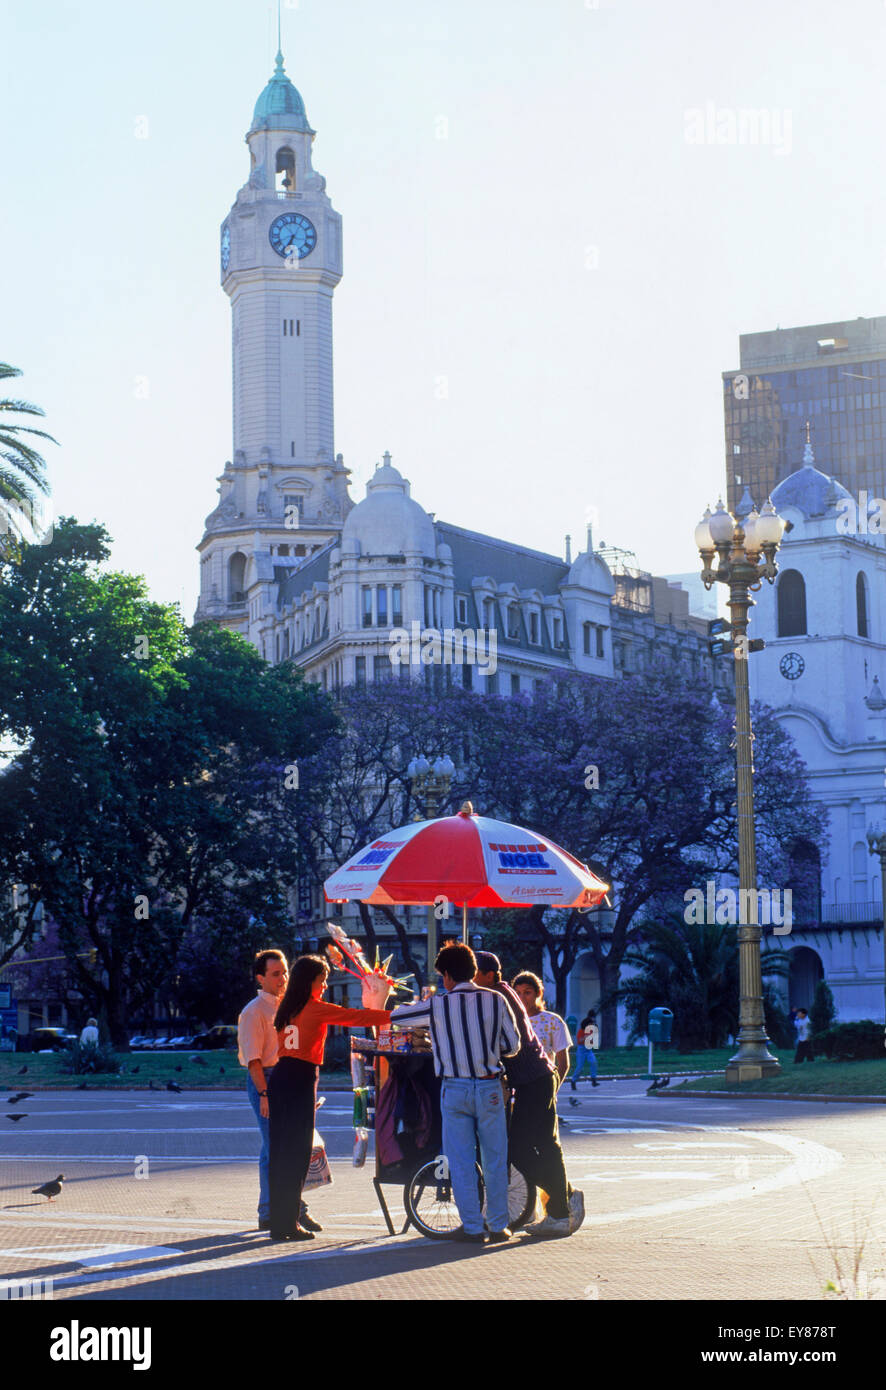 The Cabildo and Clock Tower at Plaza de Mayo with people on square buying ice cream in Buenos Aires Stock Photo